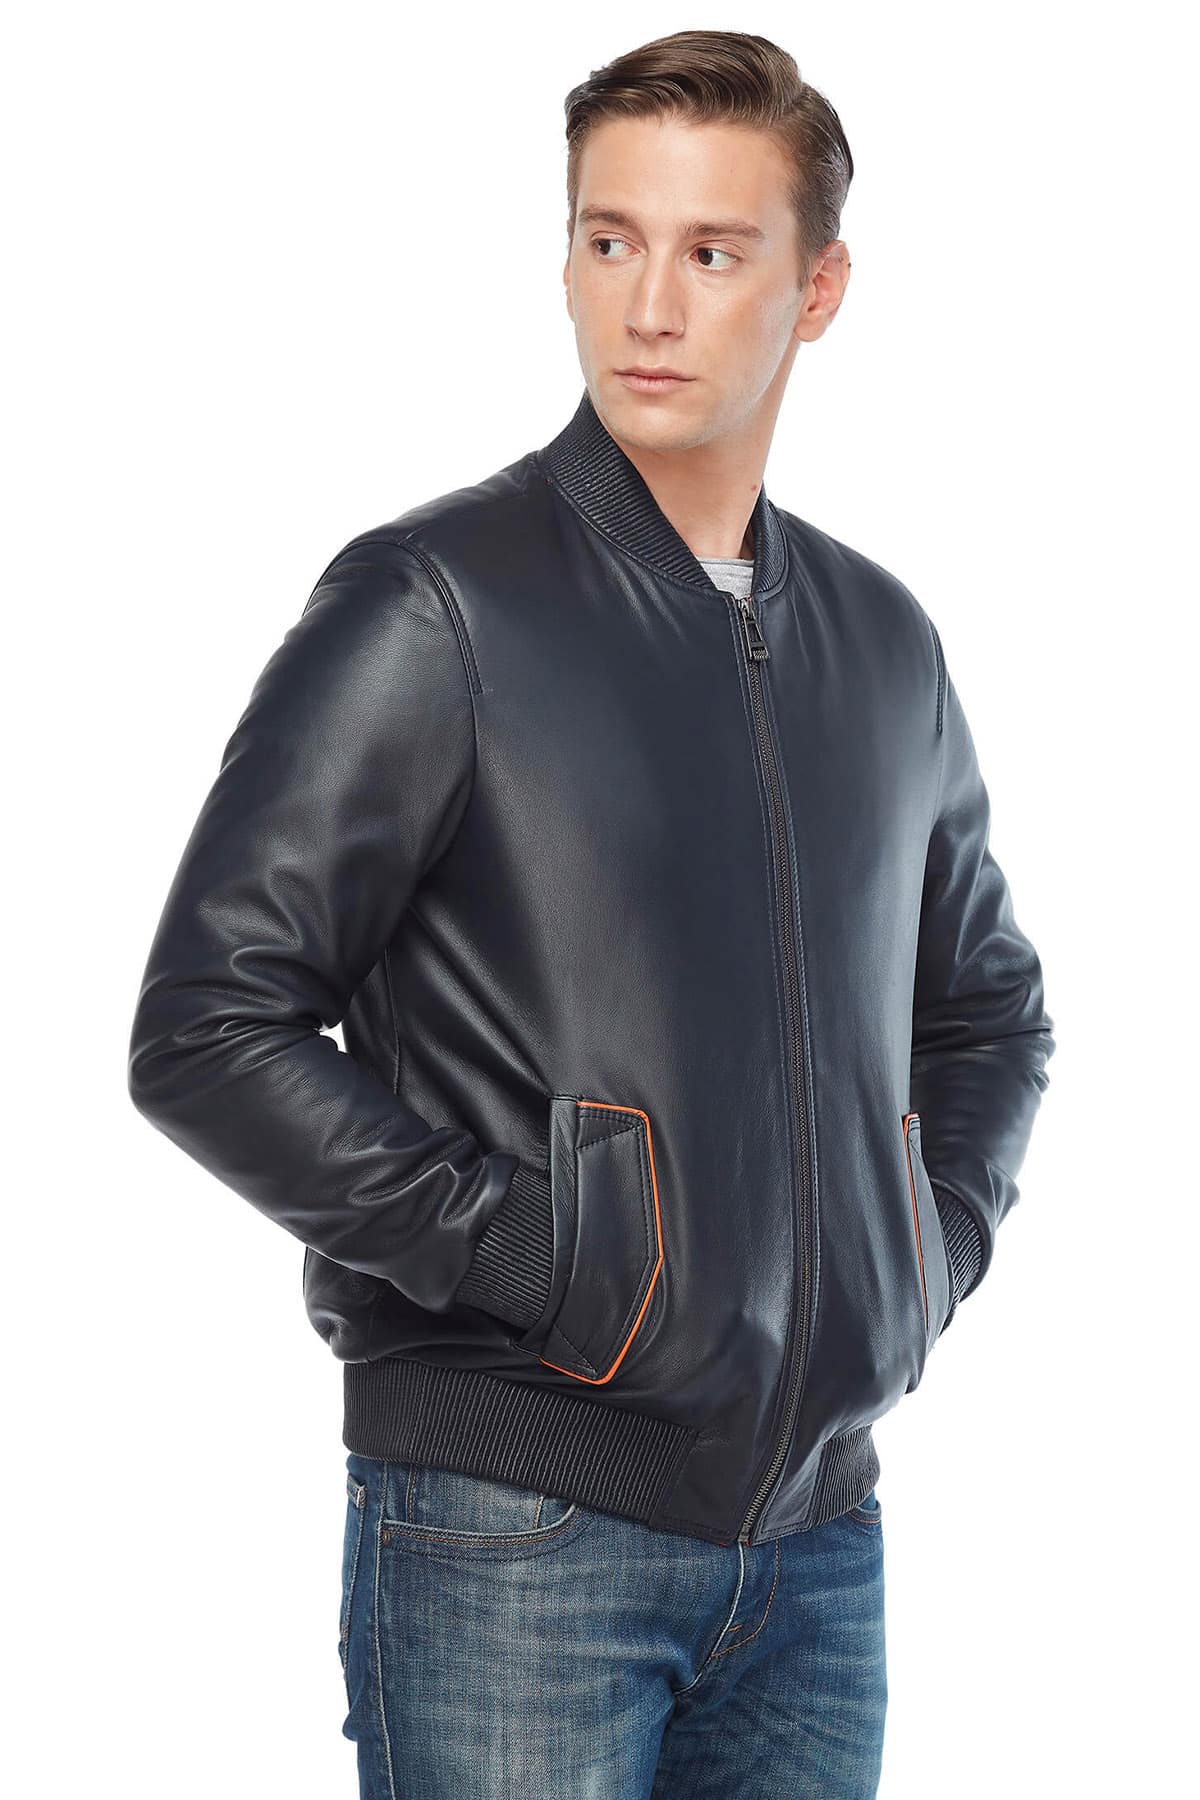 Douglas Booth Men's 100 % Real Navy-Blue Leather Bomber Jacket